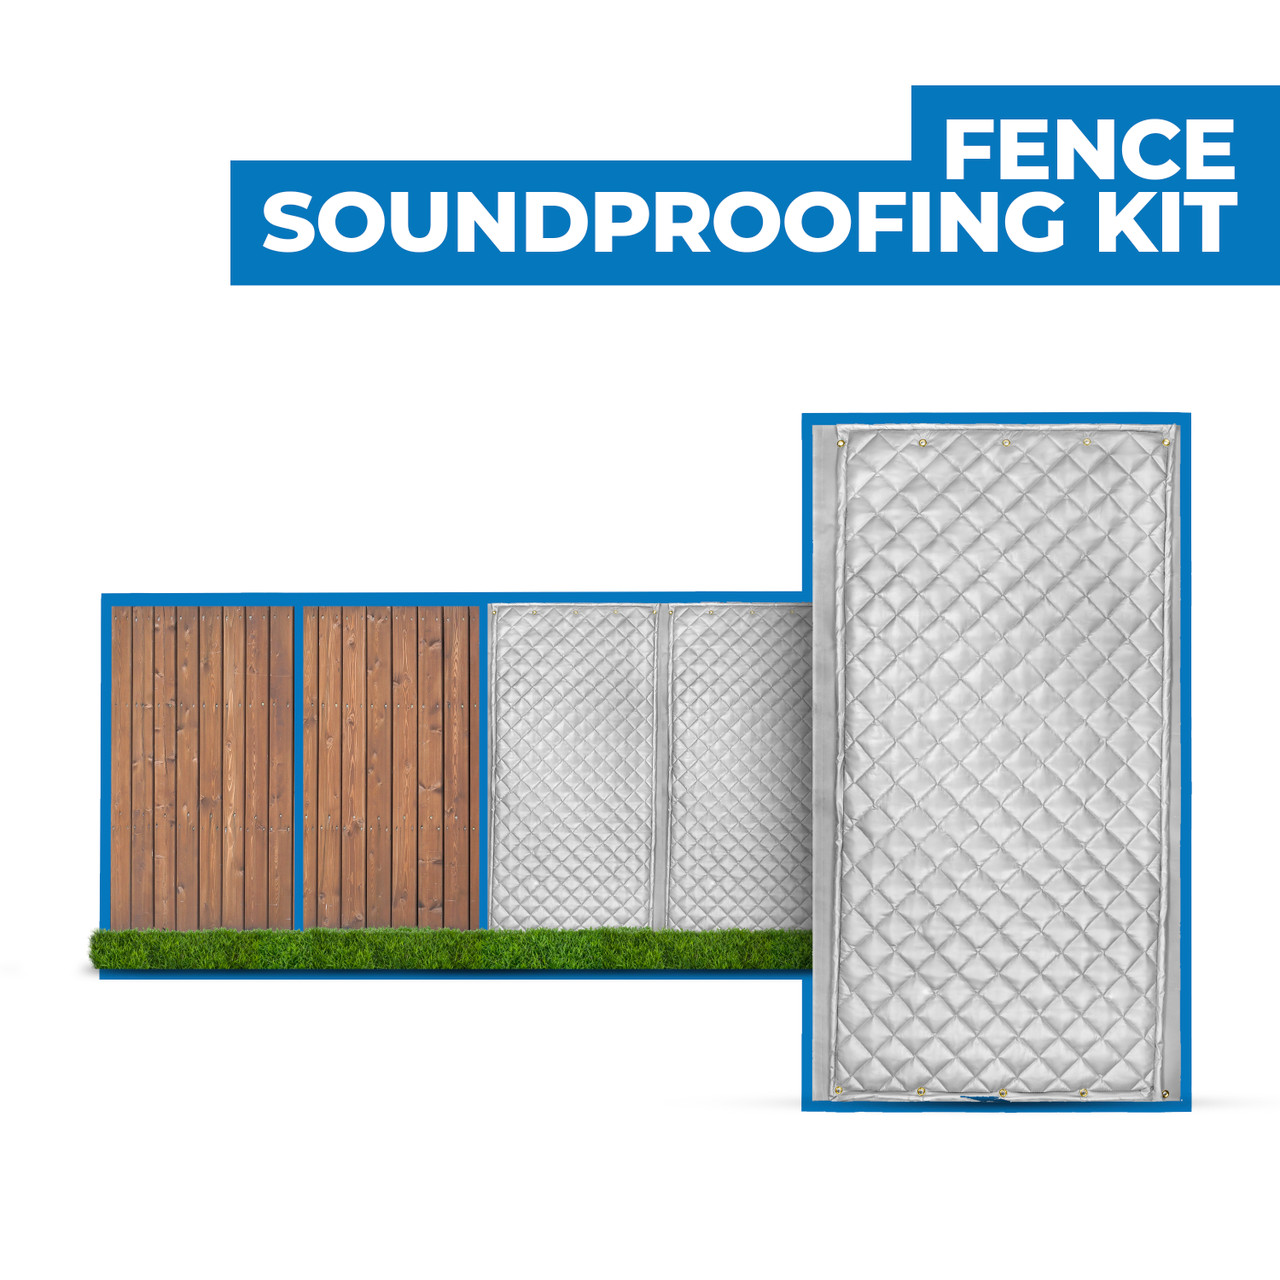 Soundproofing Blankets: Do They Really Work? - Soundproof Expert